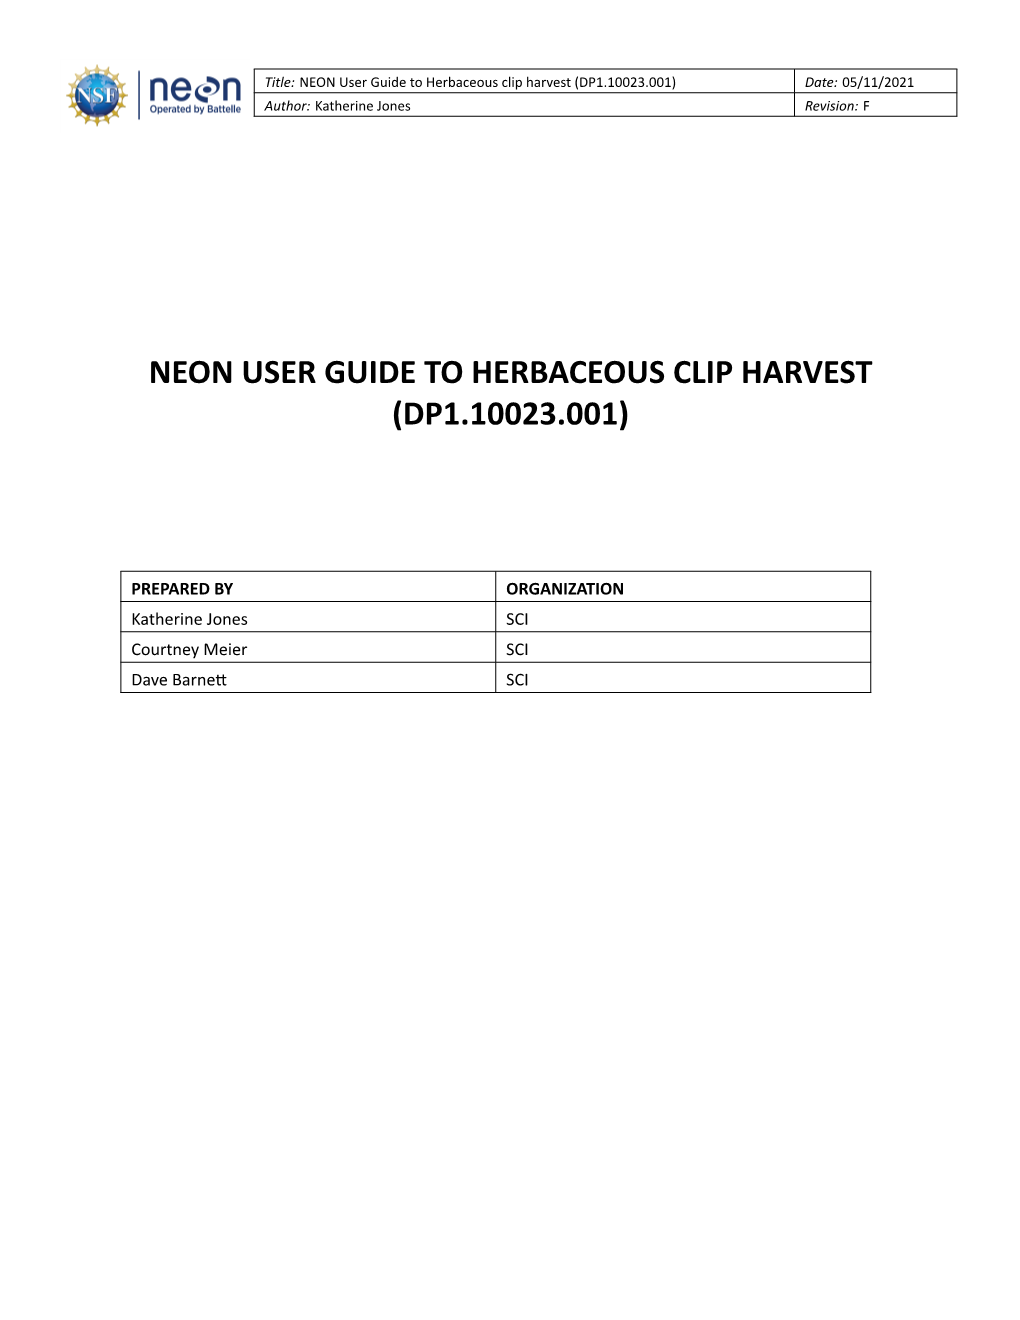 NEON User Guide to Herbaceous Clip Harvest (DP1.10023.001) Date: 05/11/2021 Author: Katherine Jones Revision: F